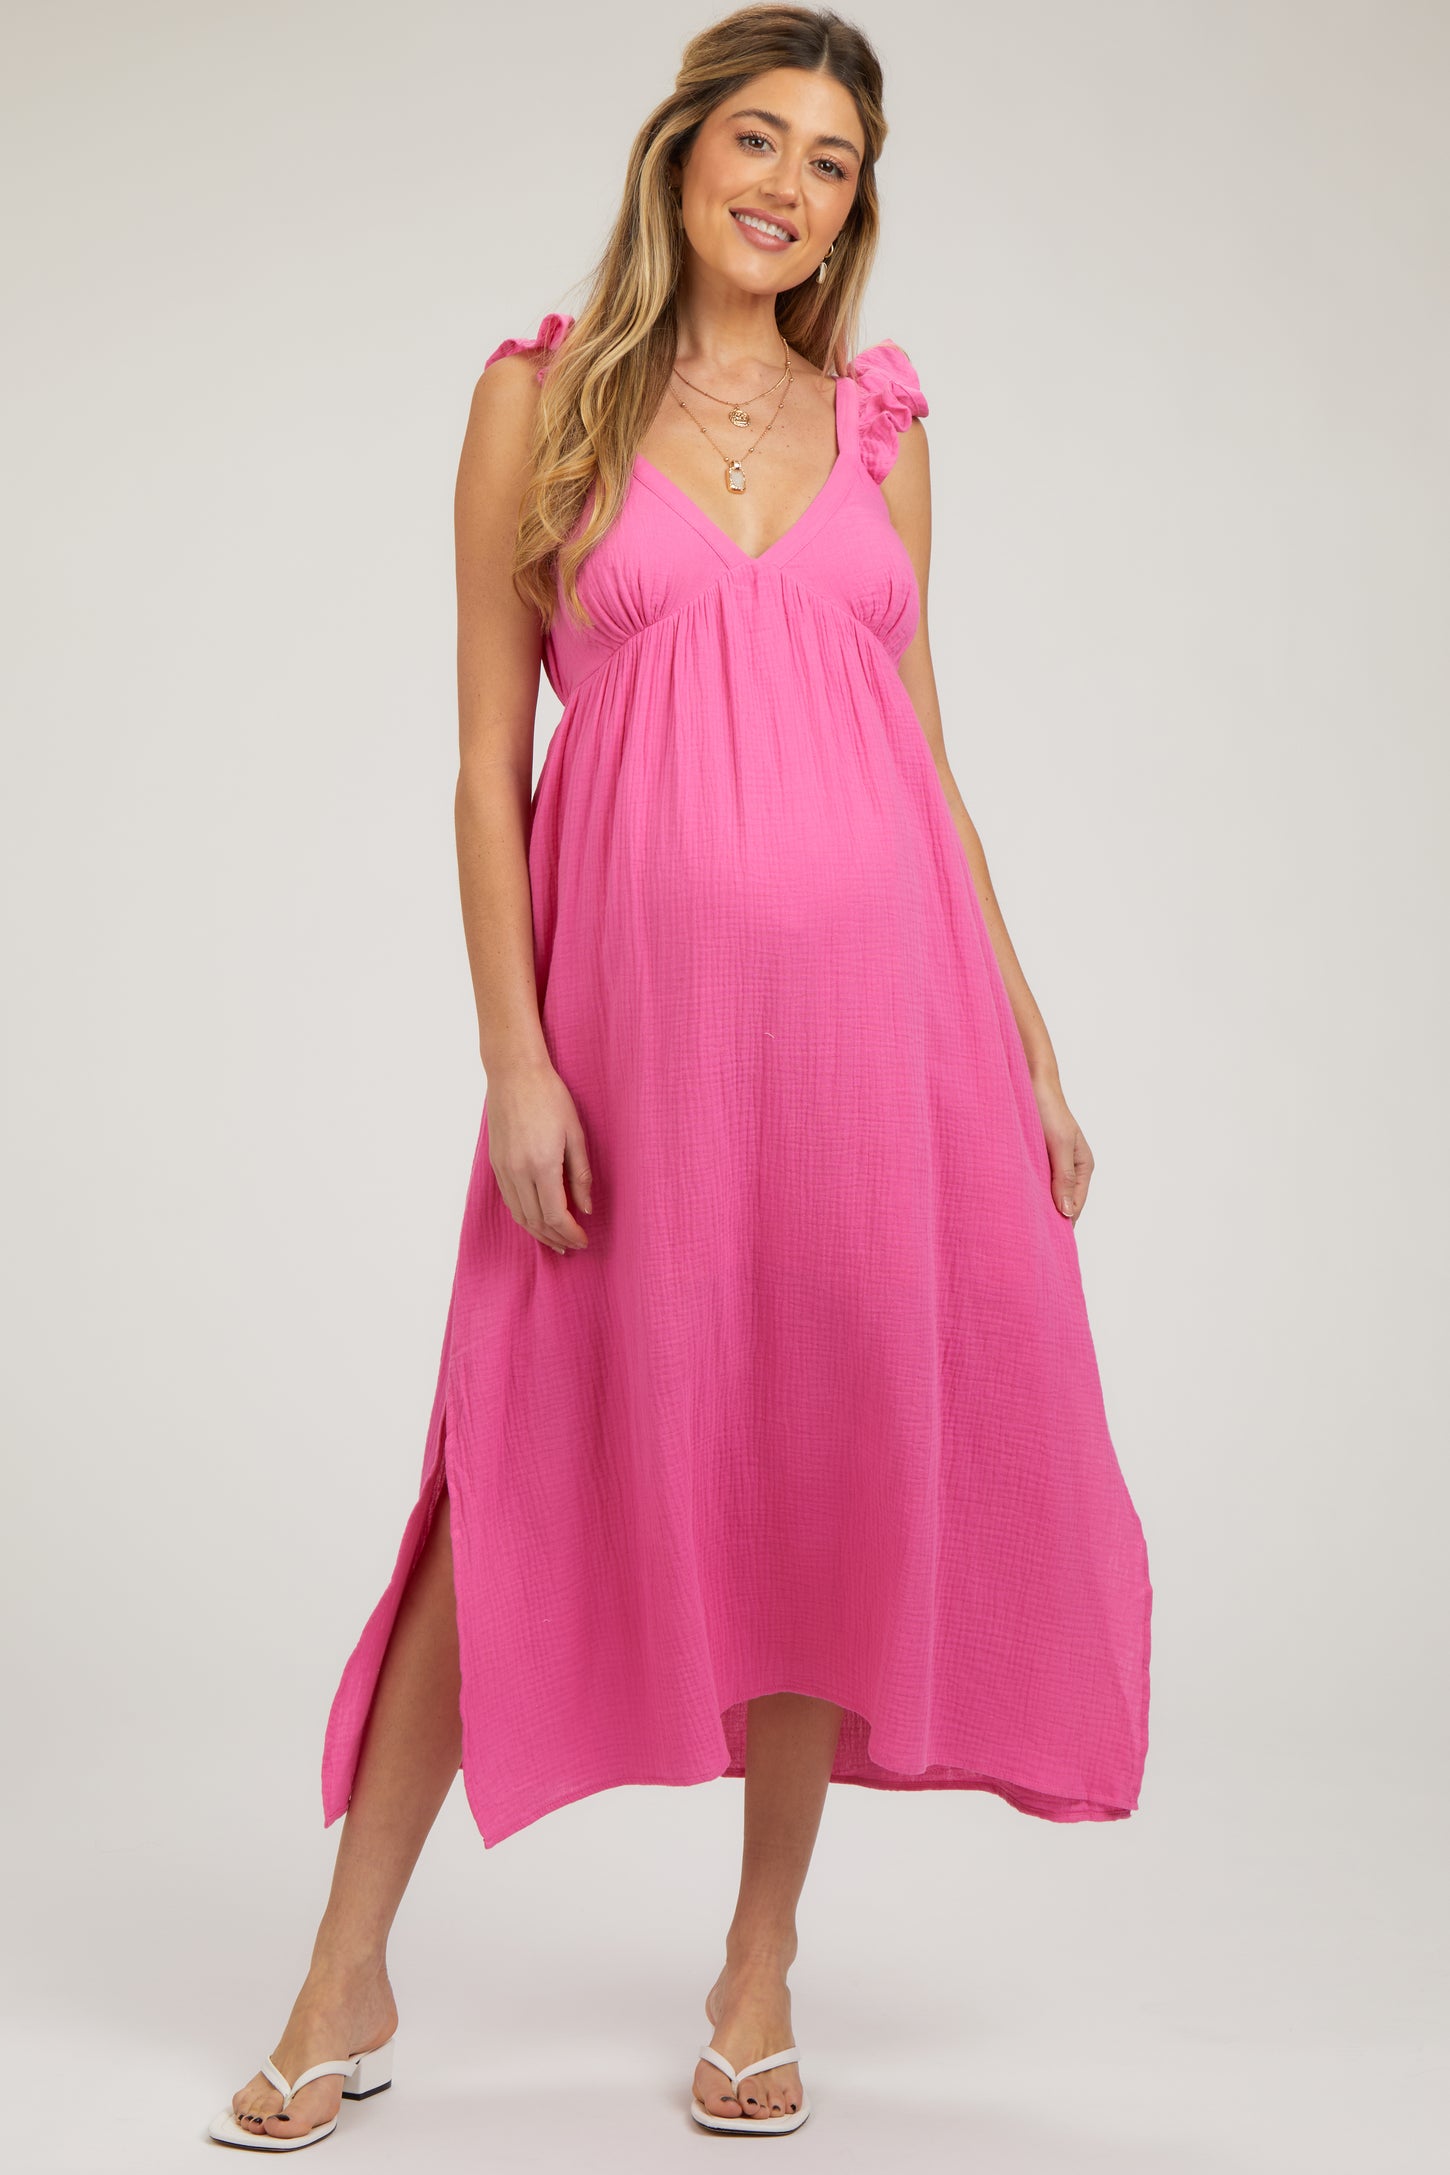 Pink Textured Off Shoulder Sleeveless Ruffle Midi Dress for Mom and Me